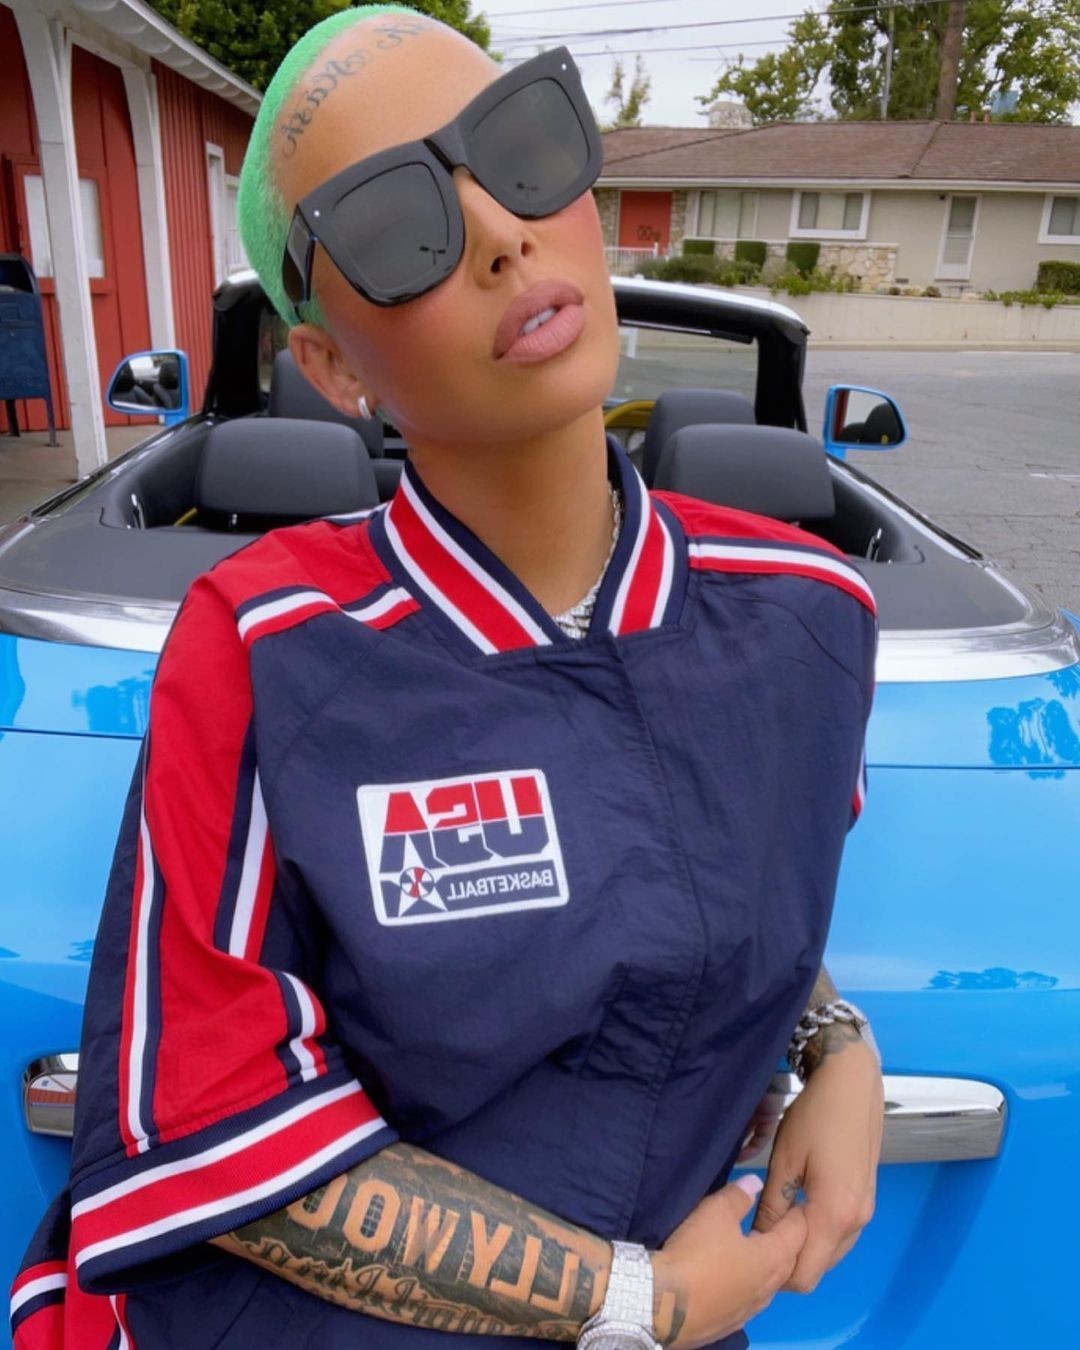 Here's a look into Amber Rose's Car Collection